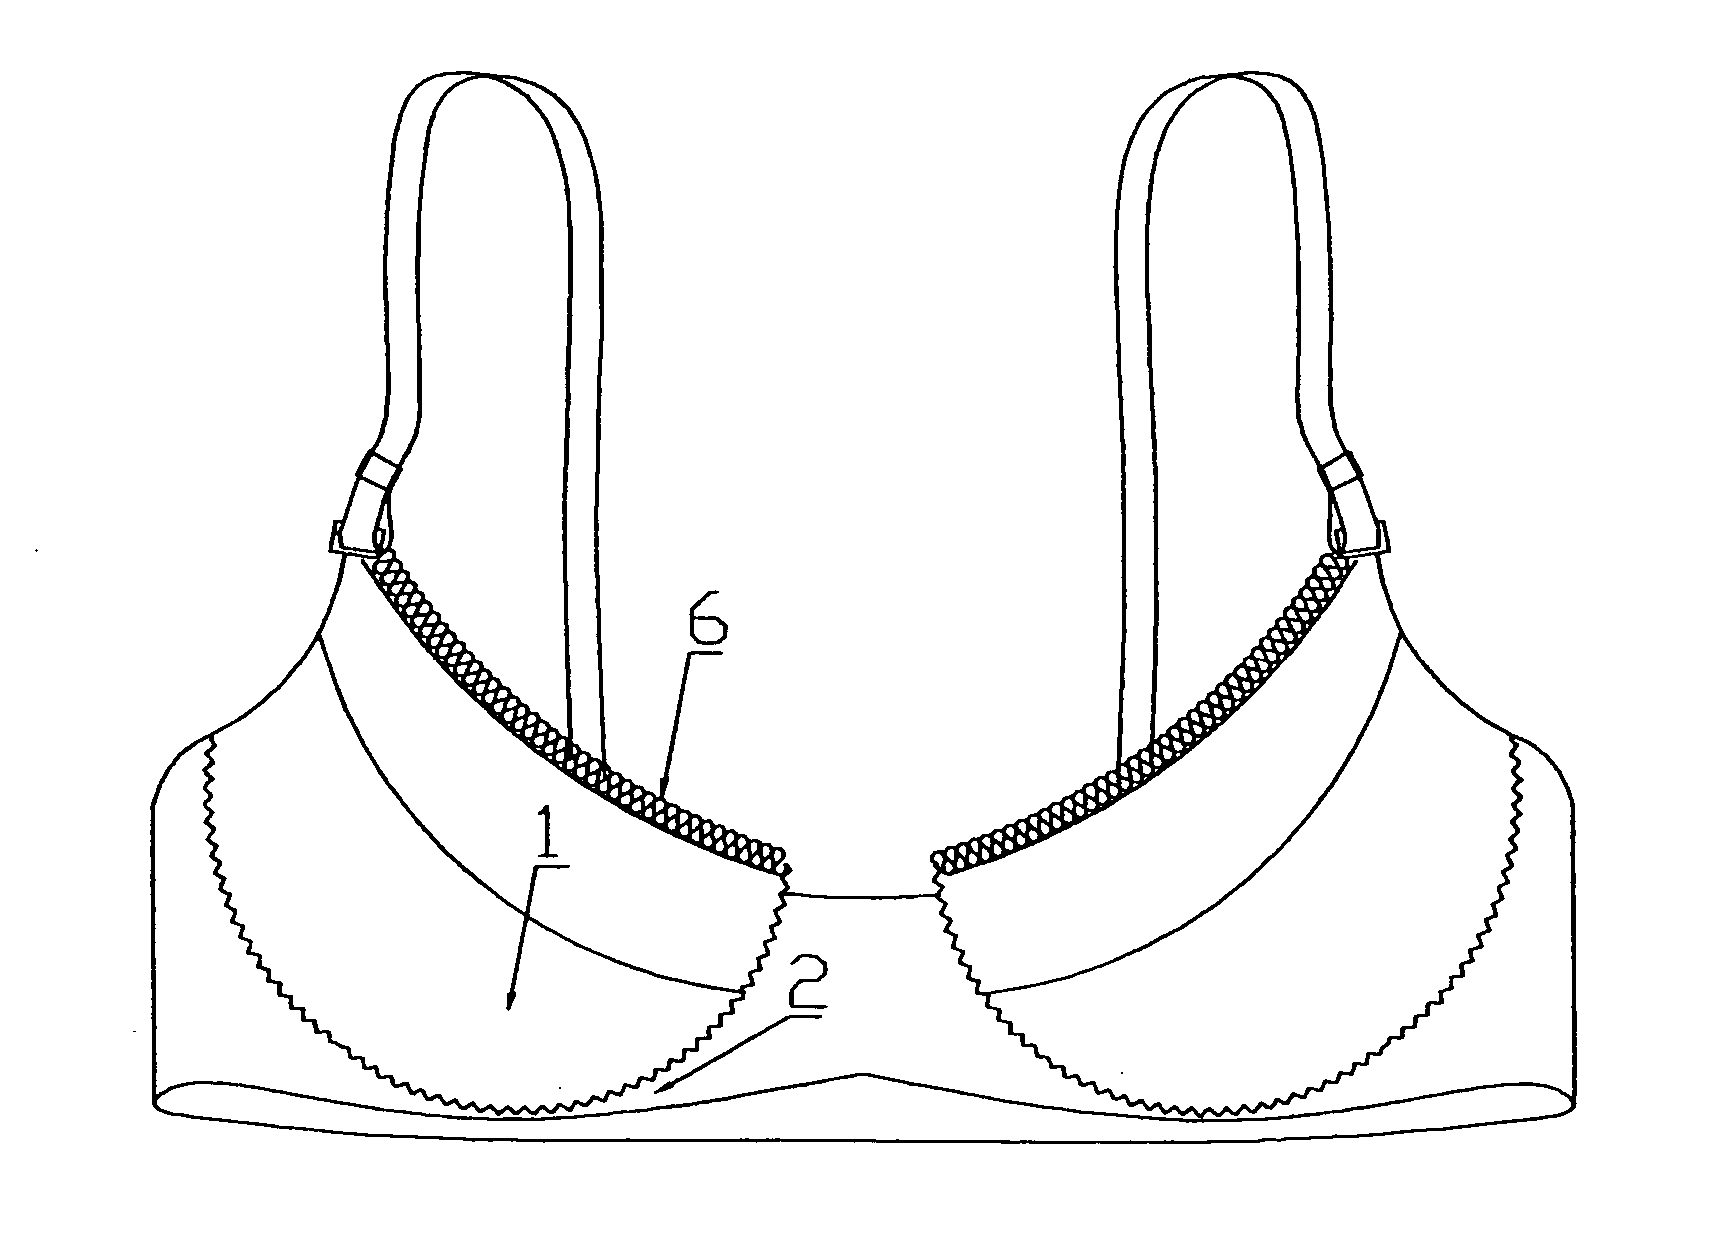 Brassiere with cup edge enhancing structure